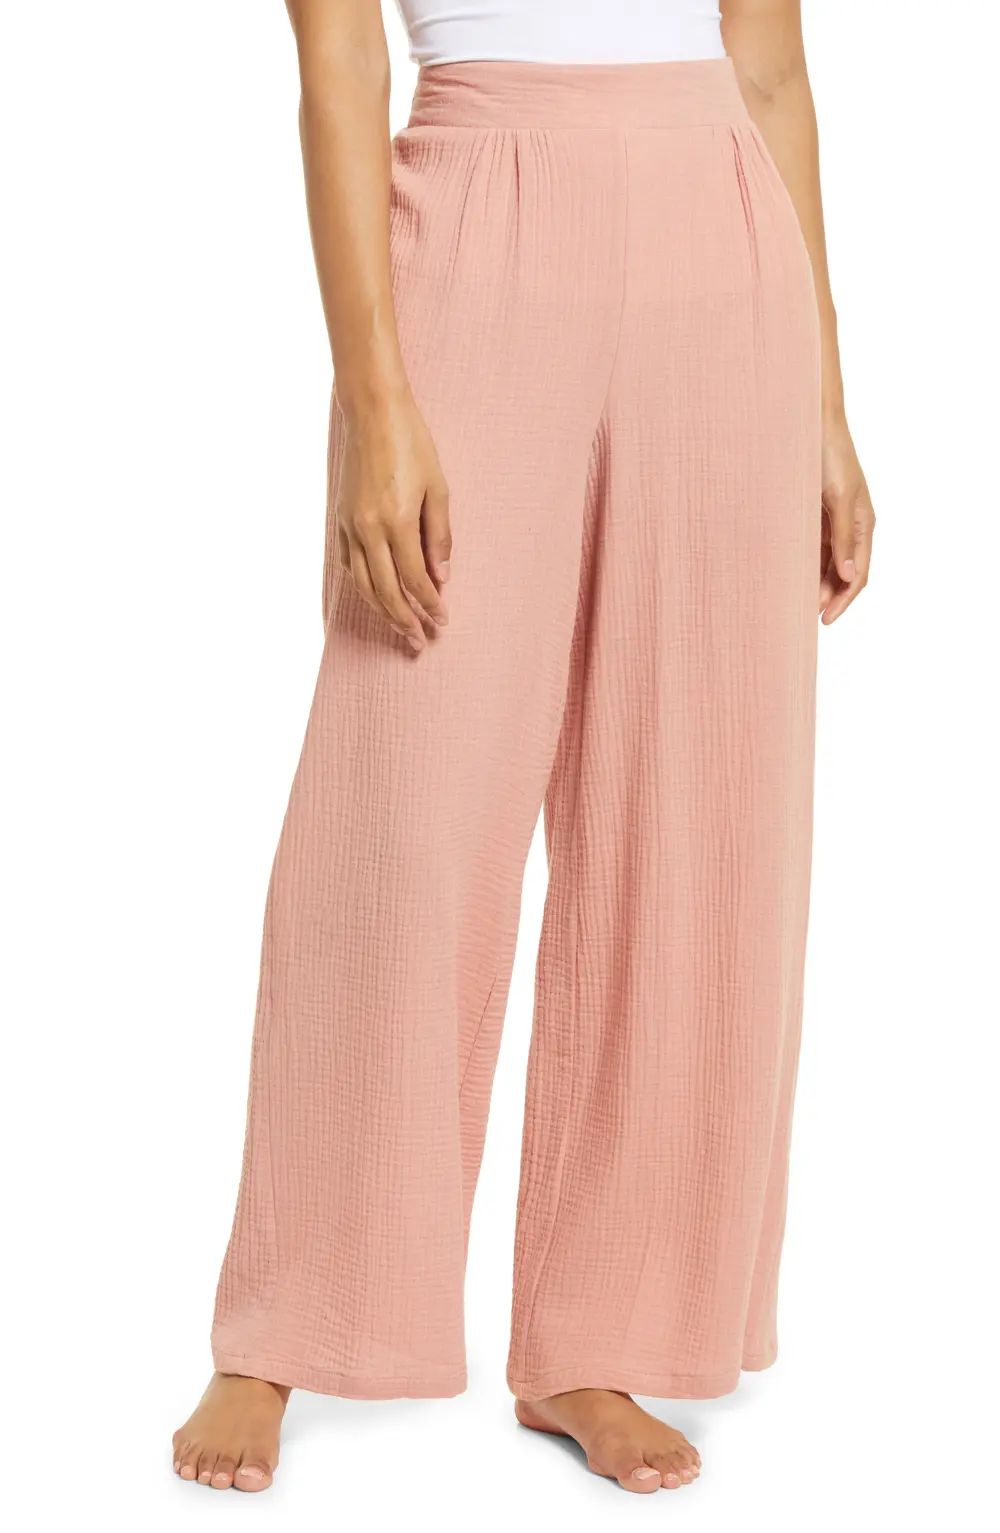 Nordstrom Cotton Wide Leg Pants, Size Small in Pink Glass at Nordstrom | Nordstrom Canada